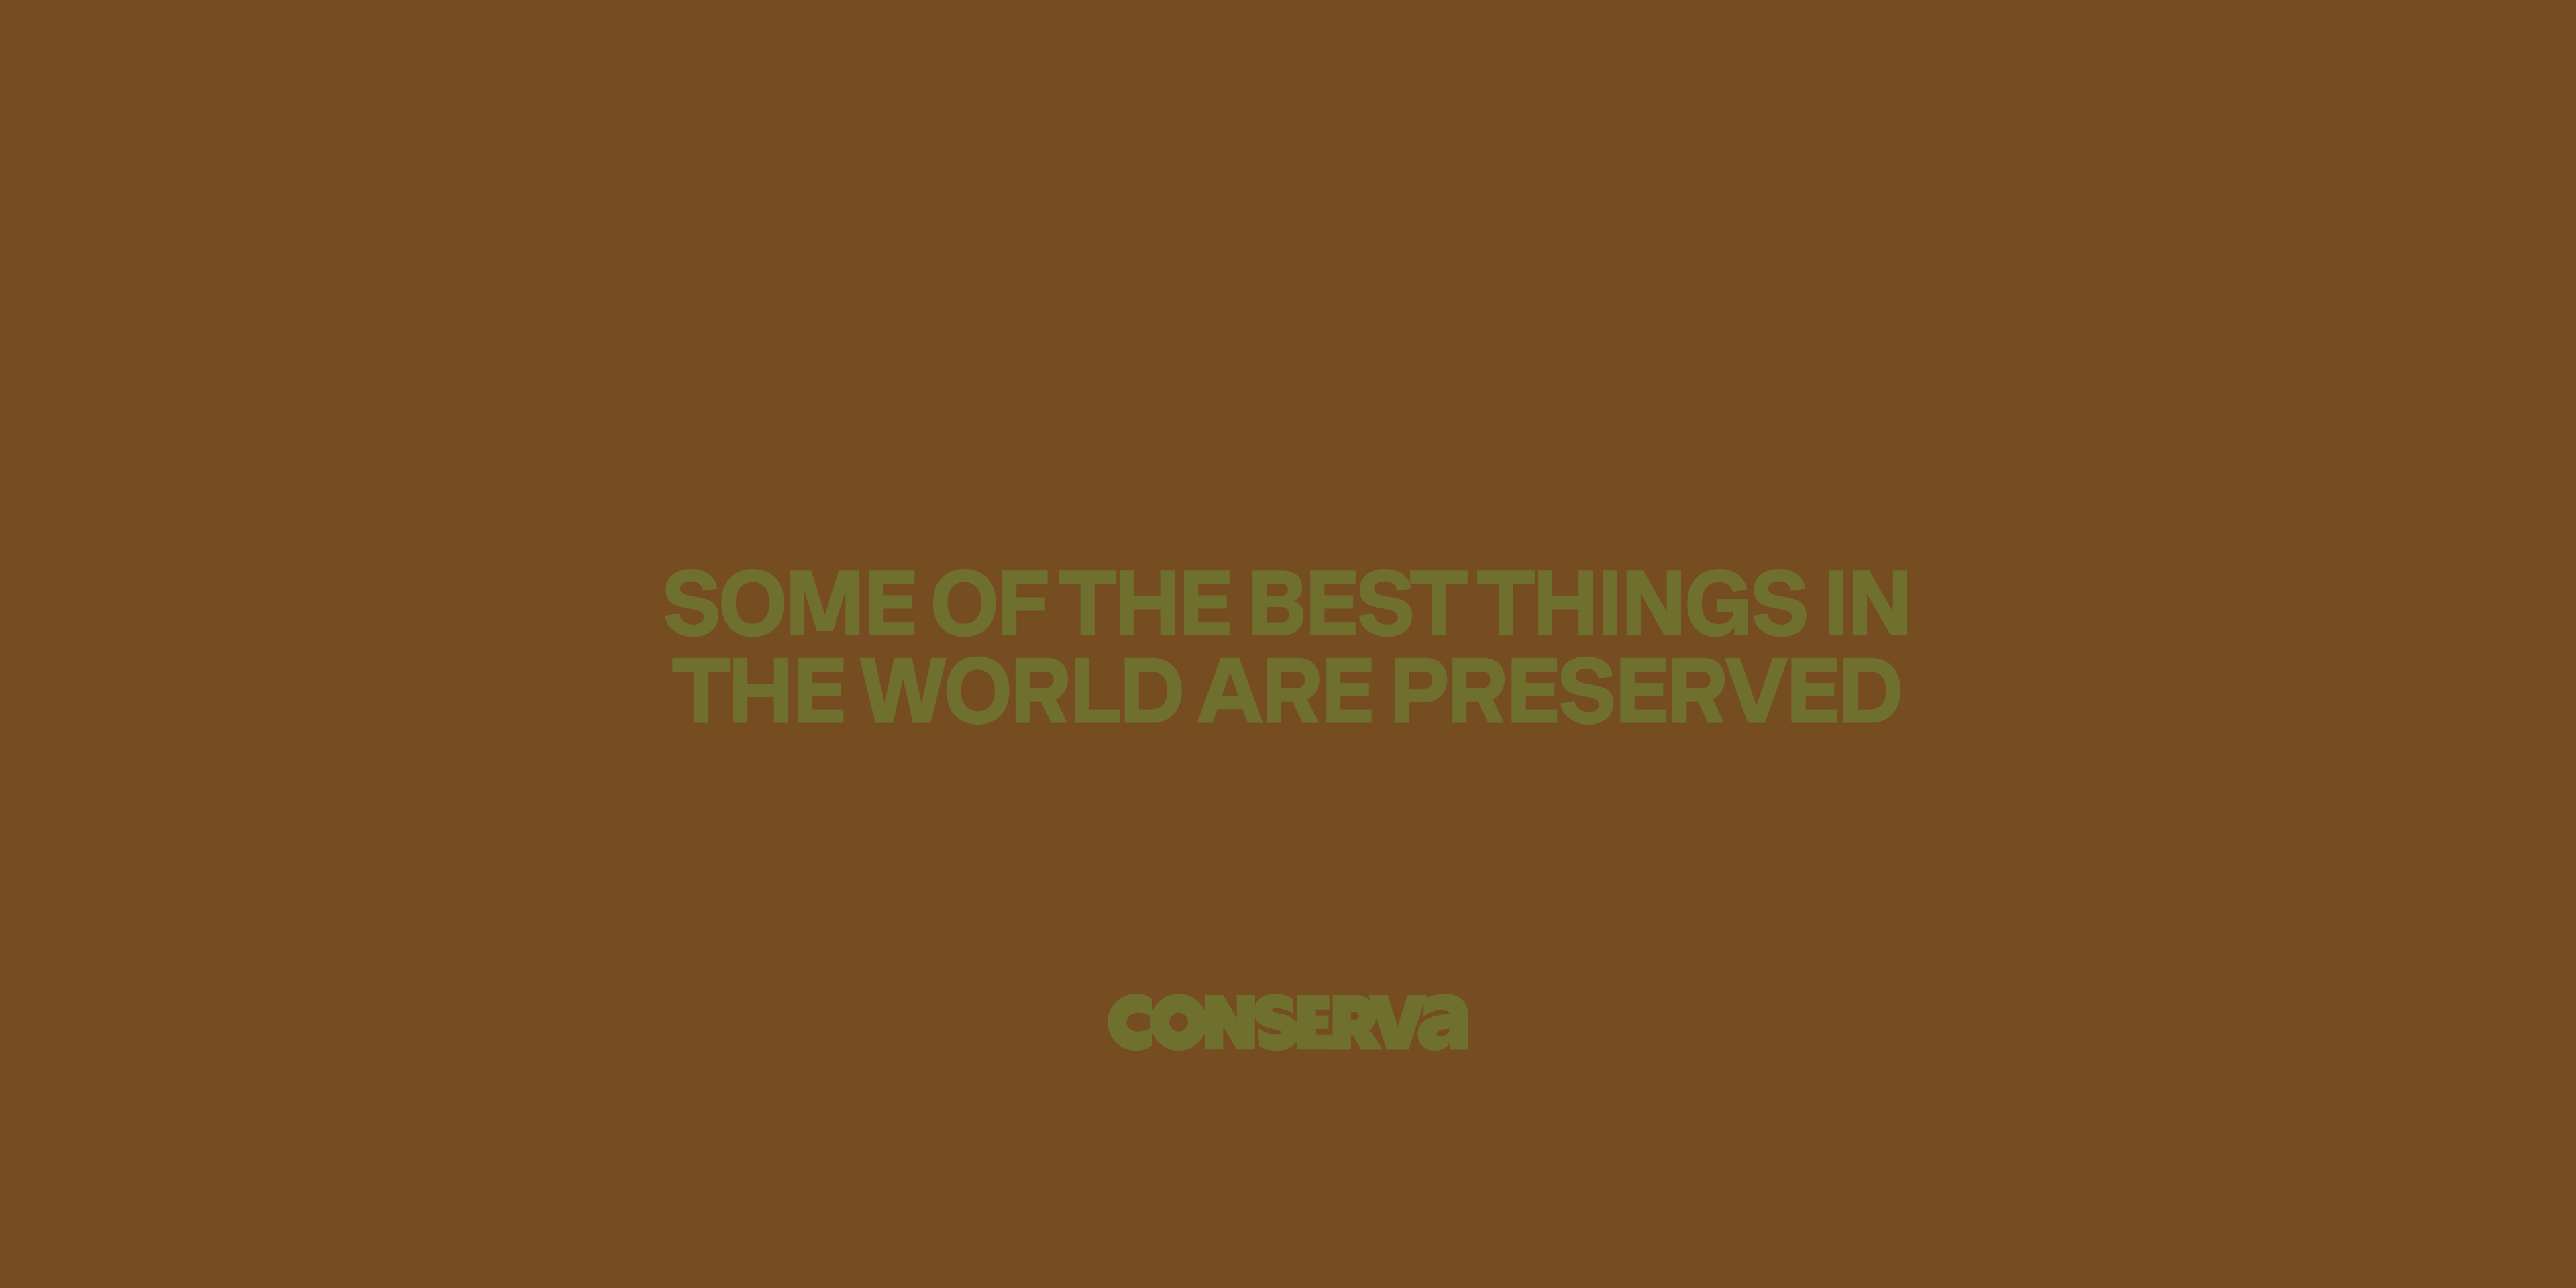 Conserva image stating "SOME OF THE BEST THINGS IN THE WORLD ARE PRESERVED"